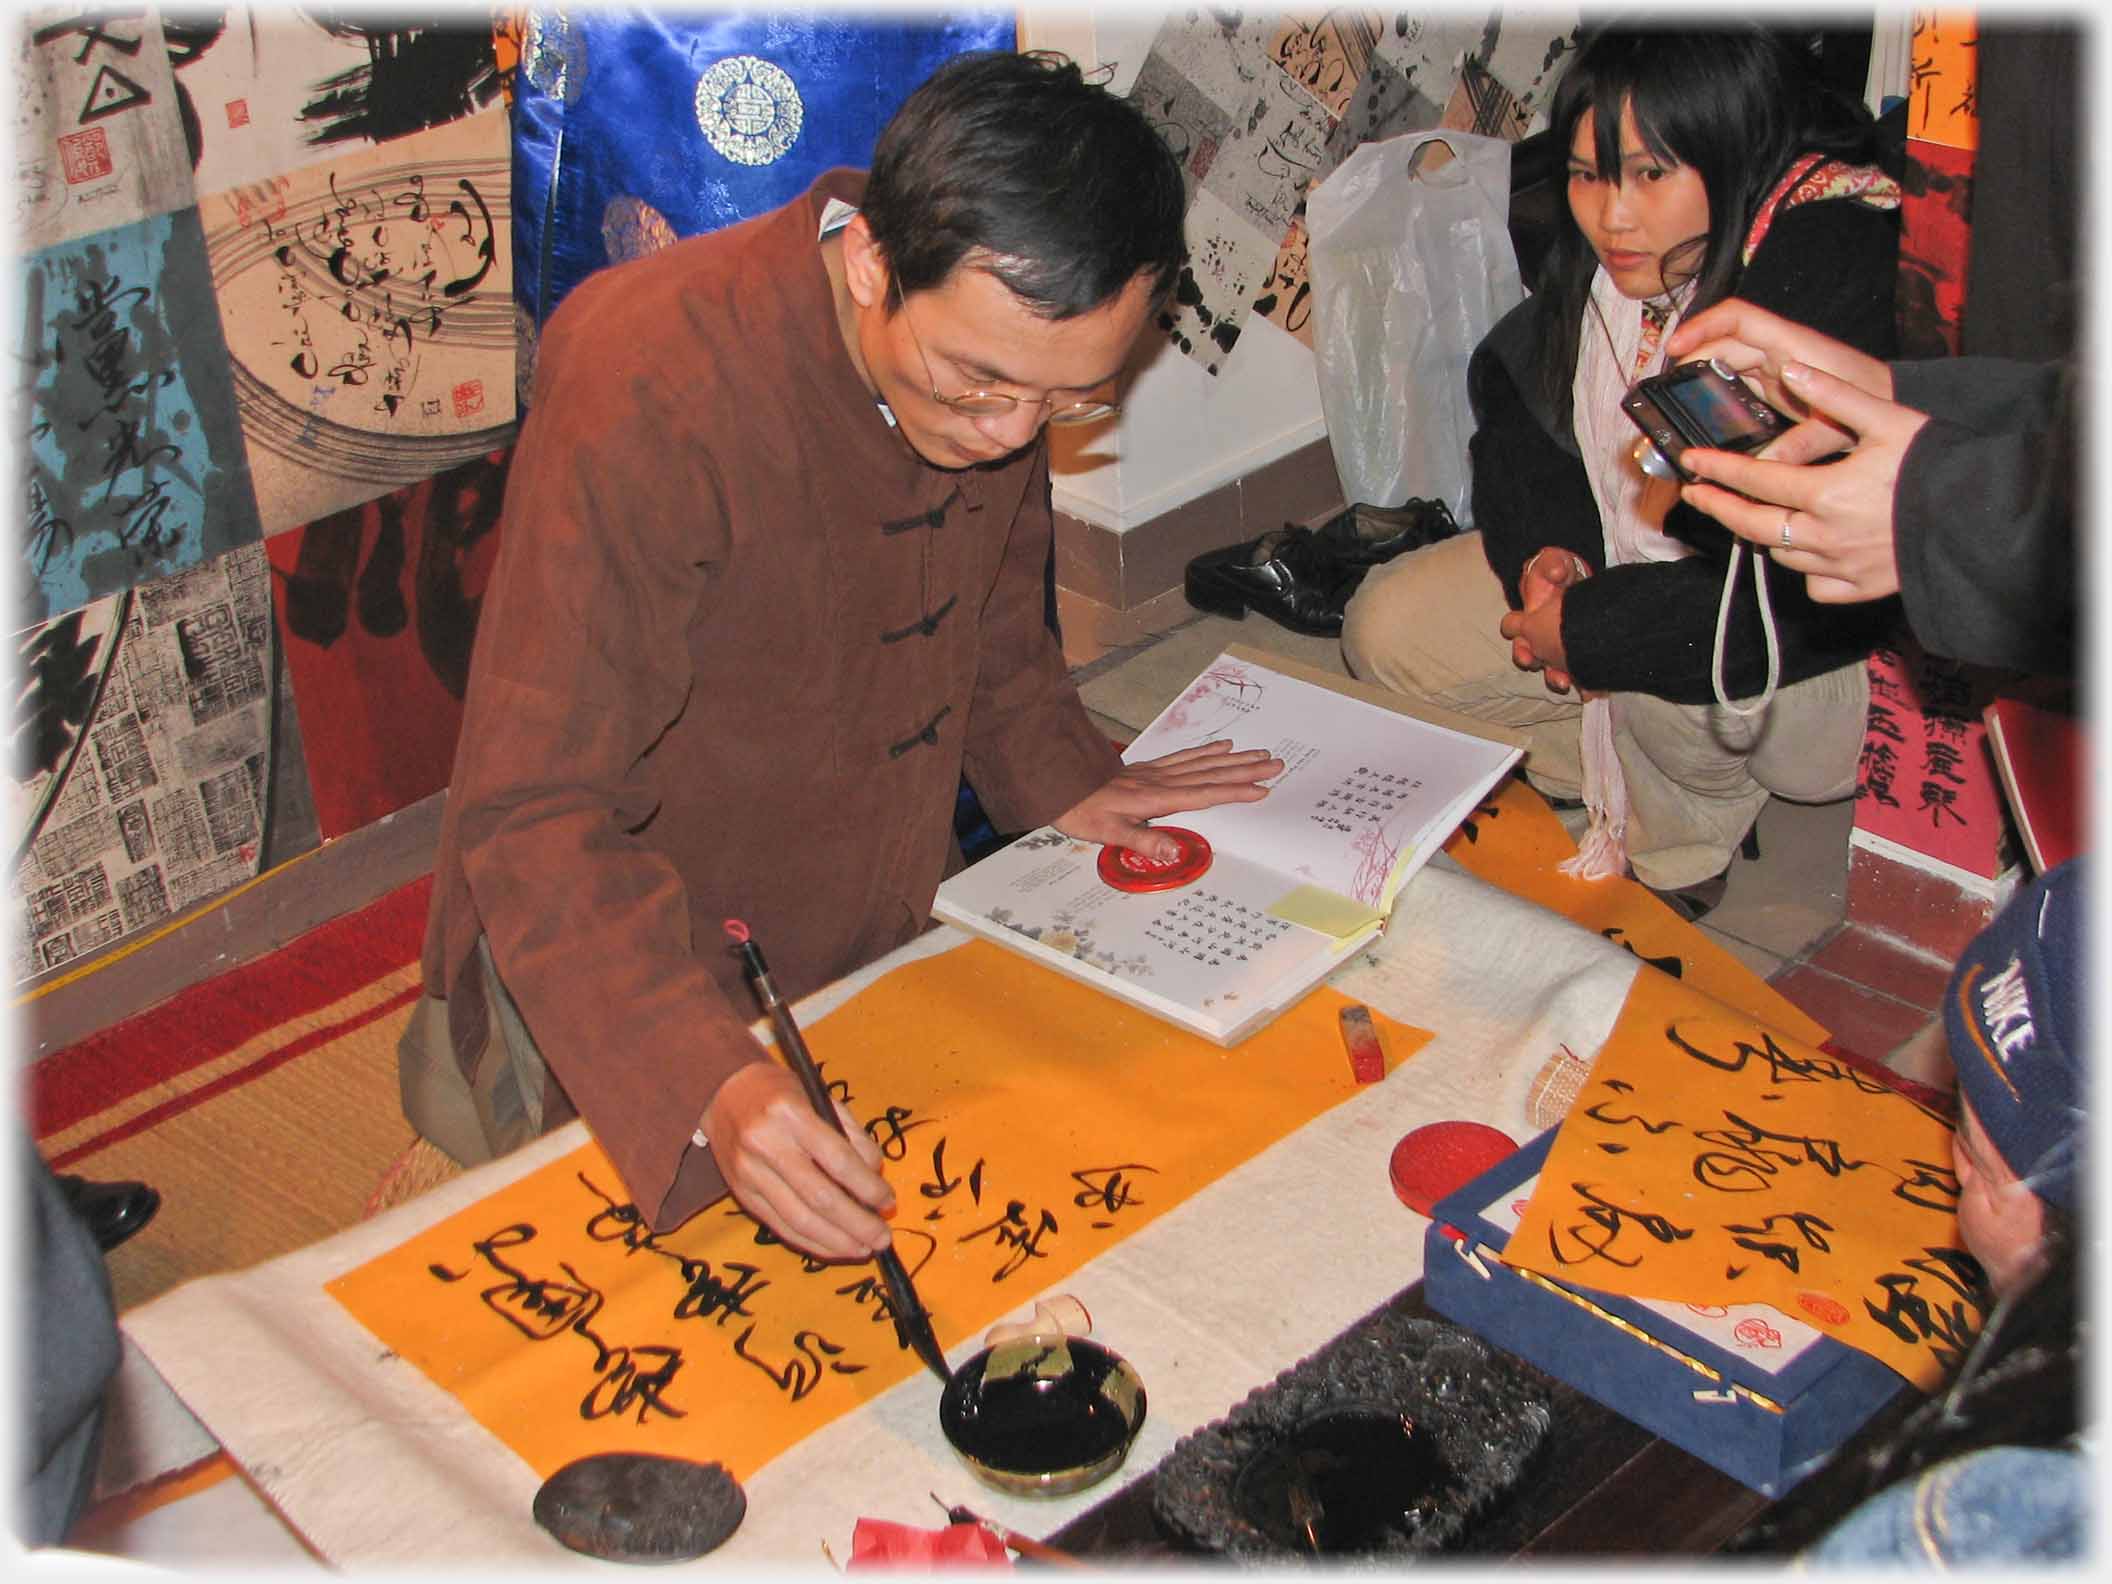 Man in brown tunic dipping a brush across a sheet with characters on it.